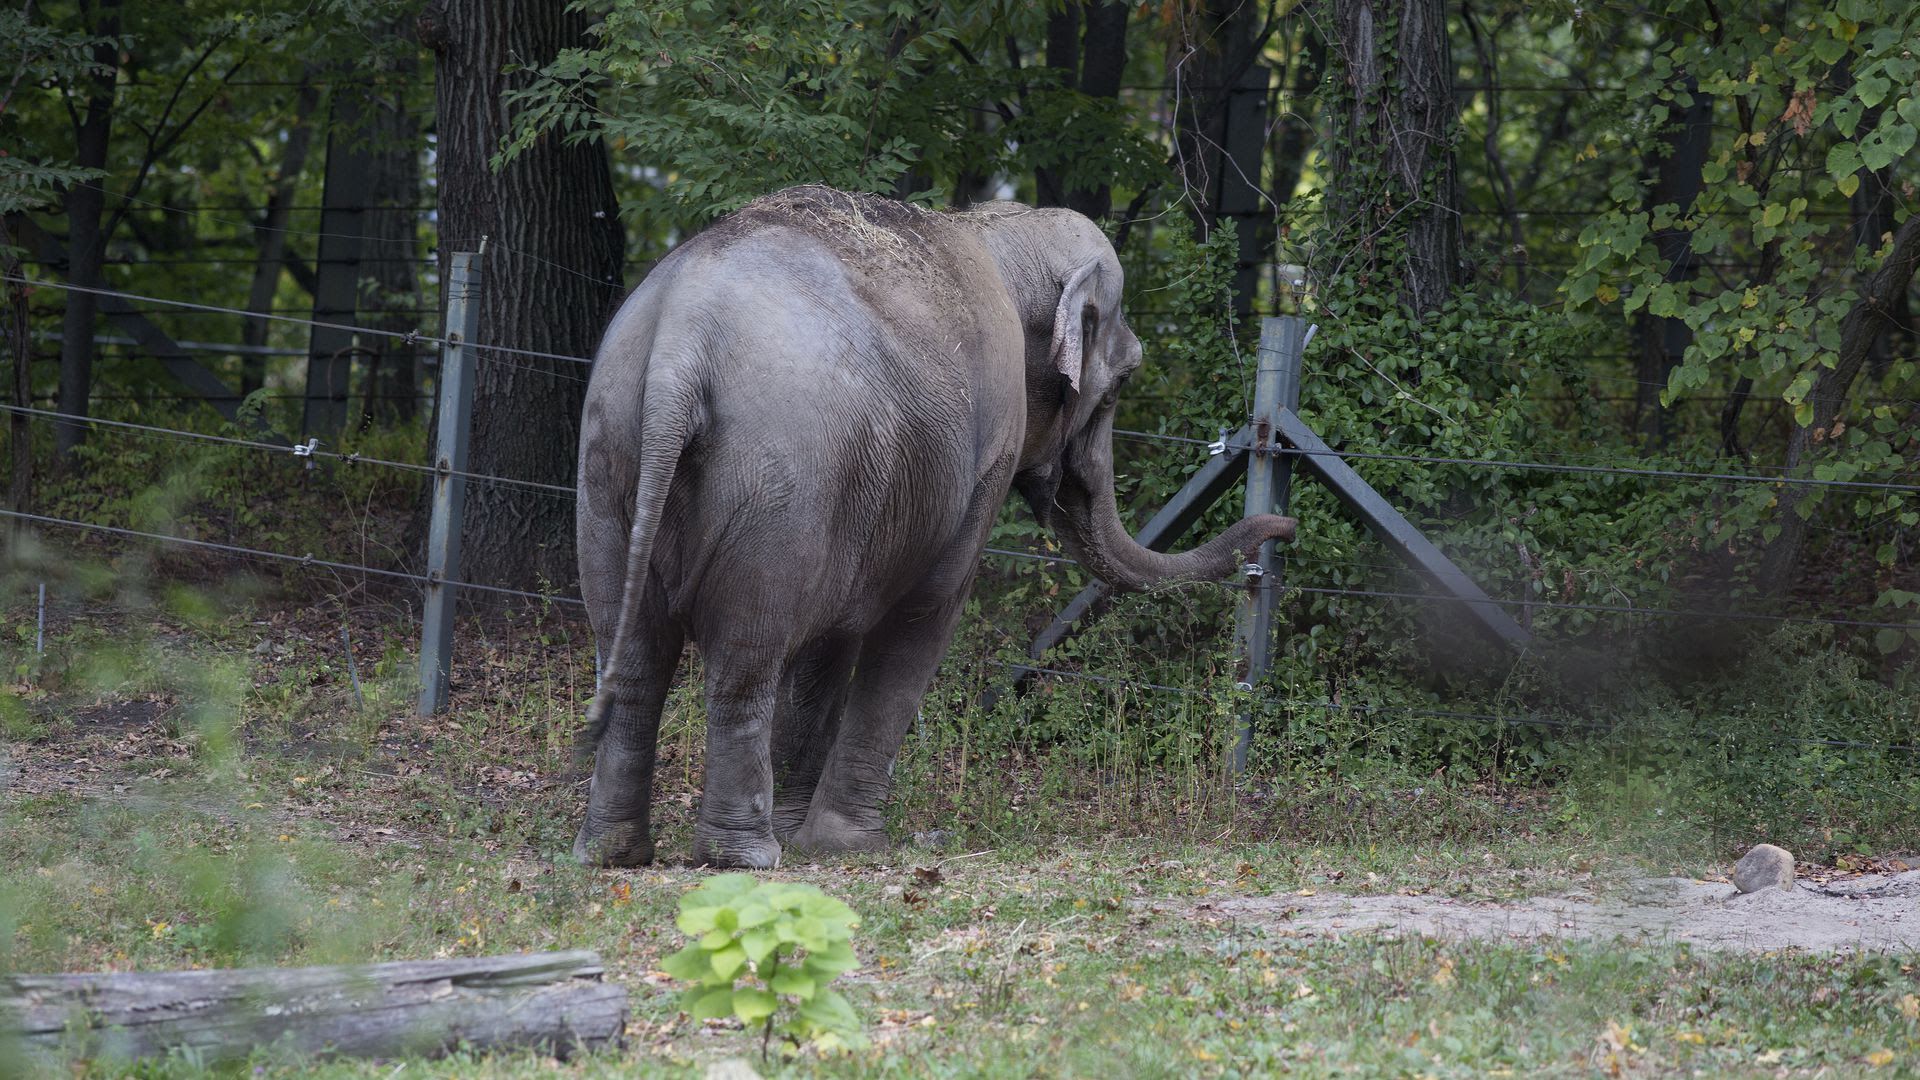 Patty, an Asian elephant who lived with the Bronx Zoo's other remaining elephant Happy until they were separated, is seen in October 2019. Photo: Andrew Lichtenstein/Corbis via Getty Images